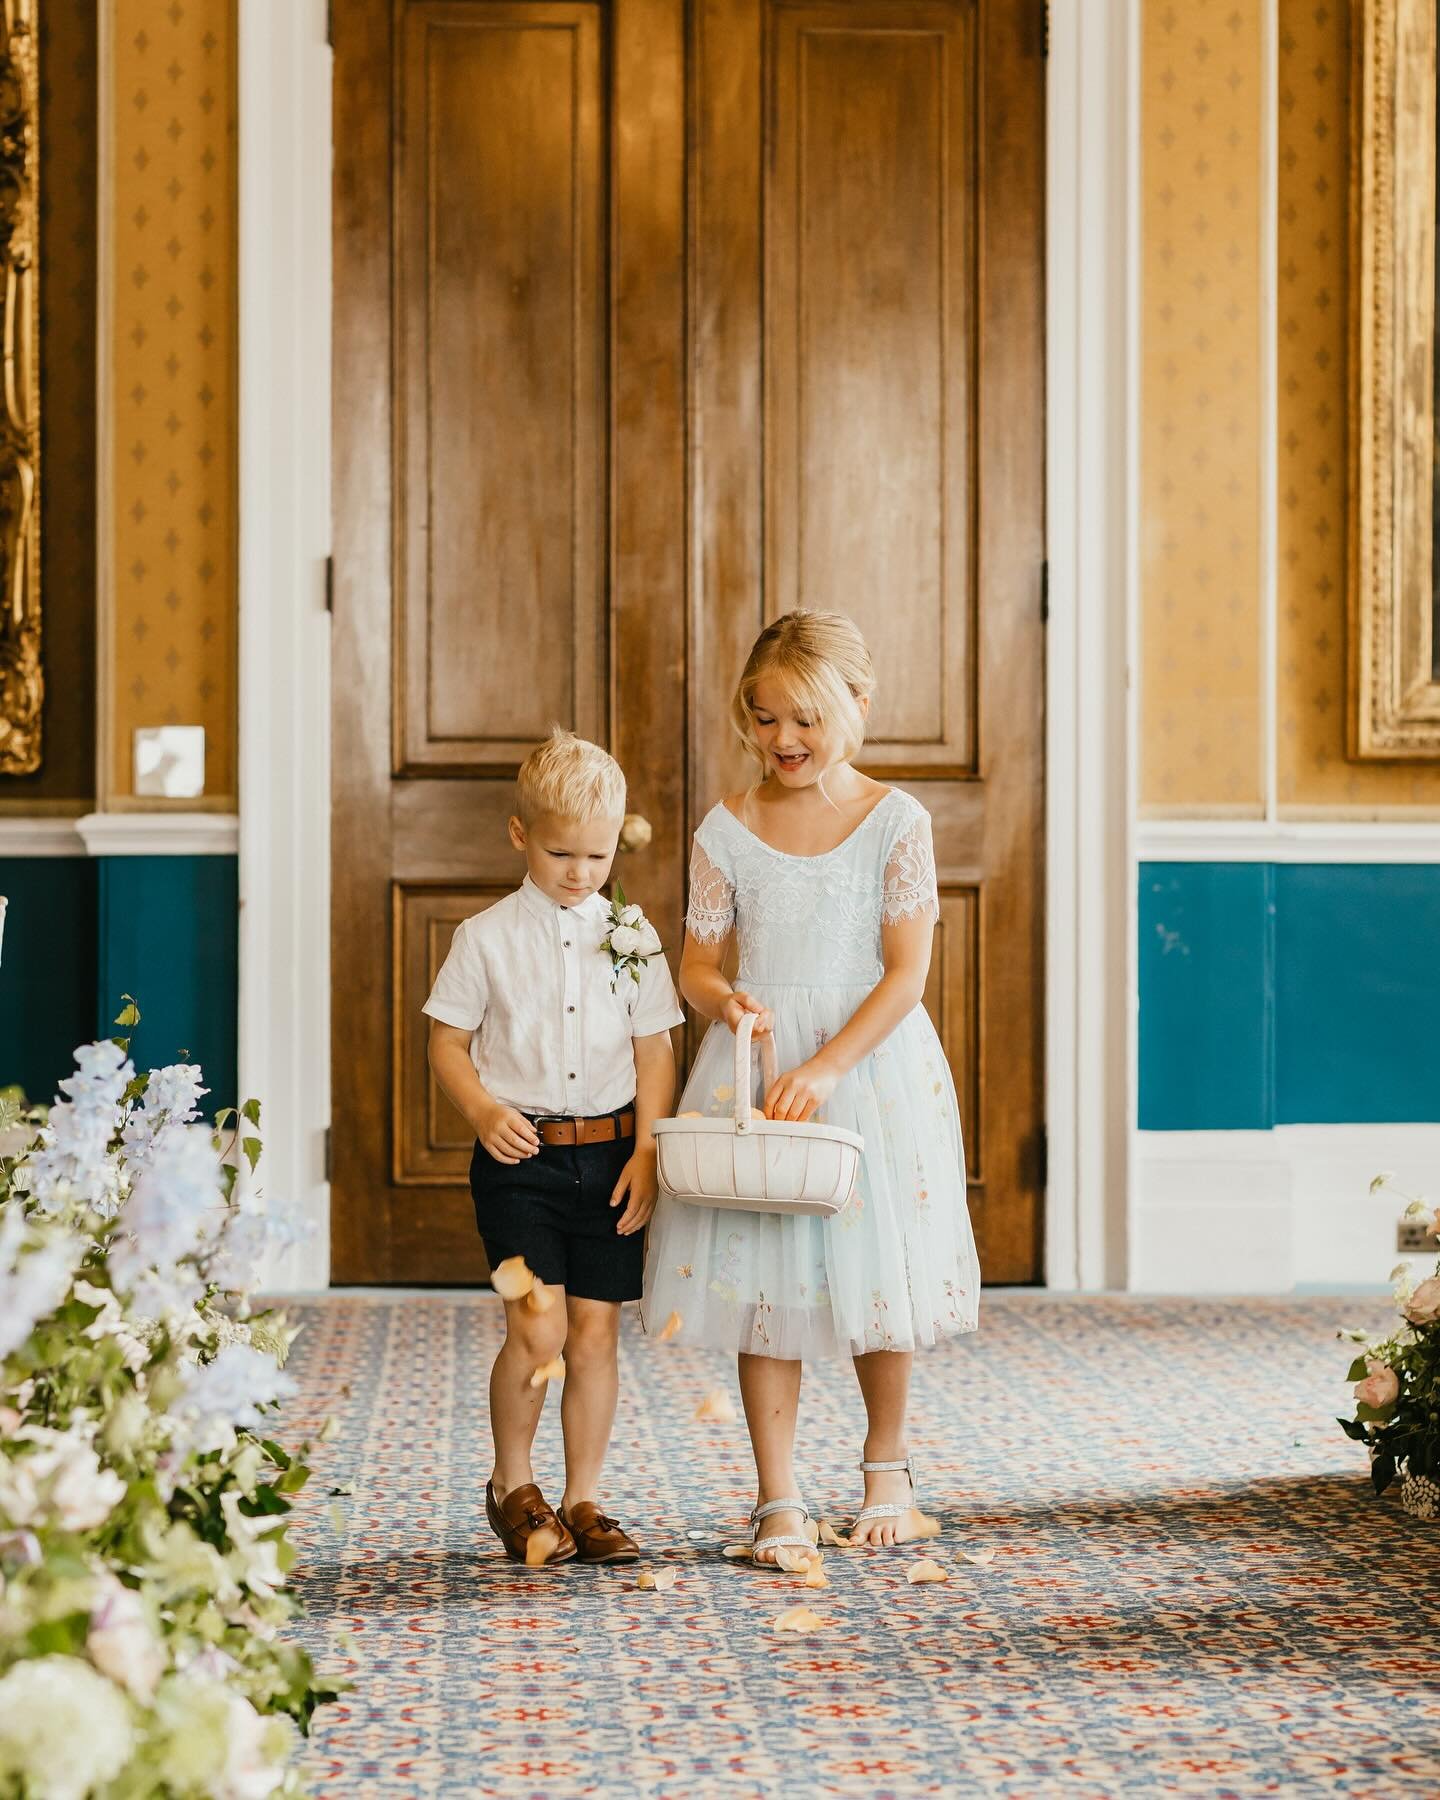 Are you planning to have a cute little page boy, a lovely flower girl, or both at your wedding? Also, who will be walking you down the aisle on your big day? Share your thoughts with us in the comments below, we'd love to hear all about it! 👇🏻

Pho